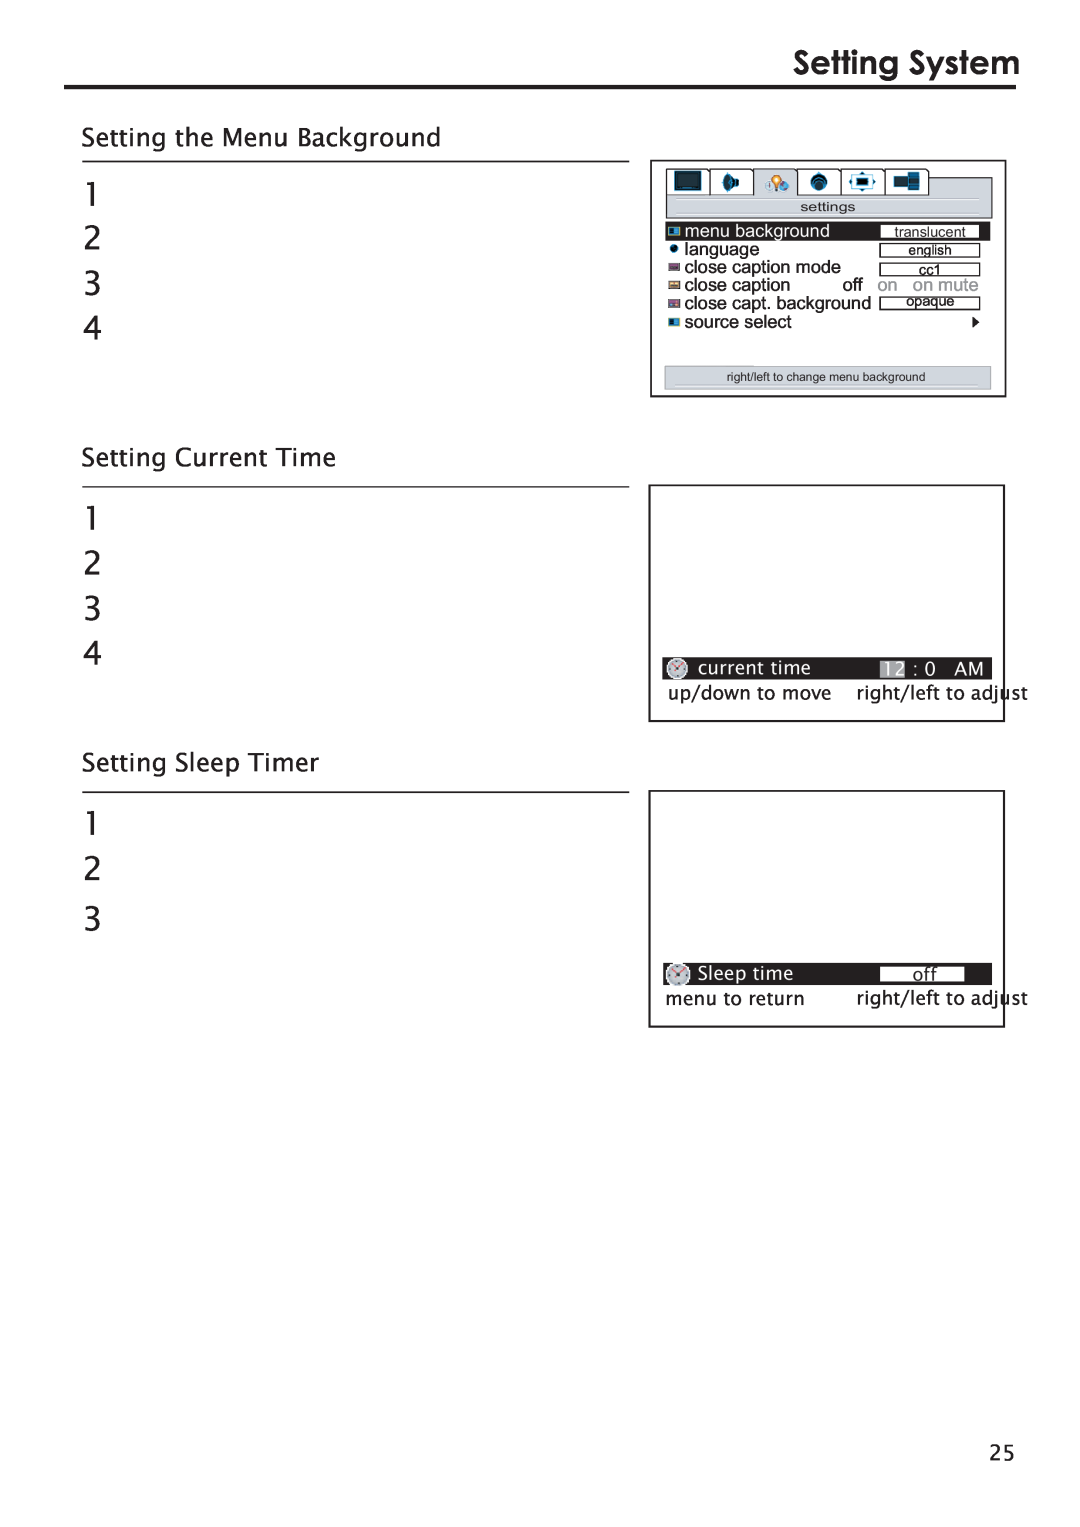 Primate Systems PDP TV manual Setting System, Setting the Menu Background, Setting Current Time, Setting Sleep Timer, 0 AM 